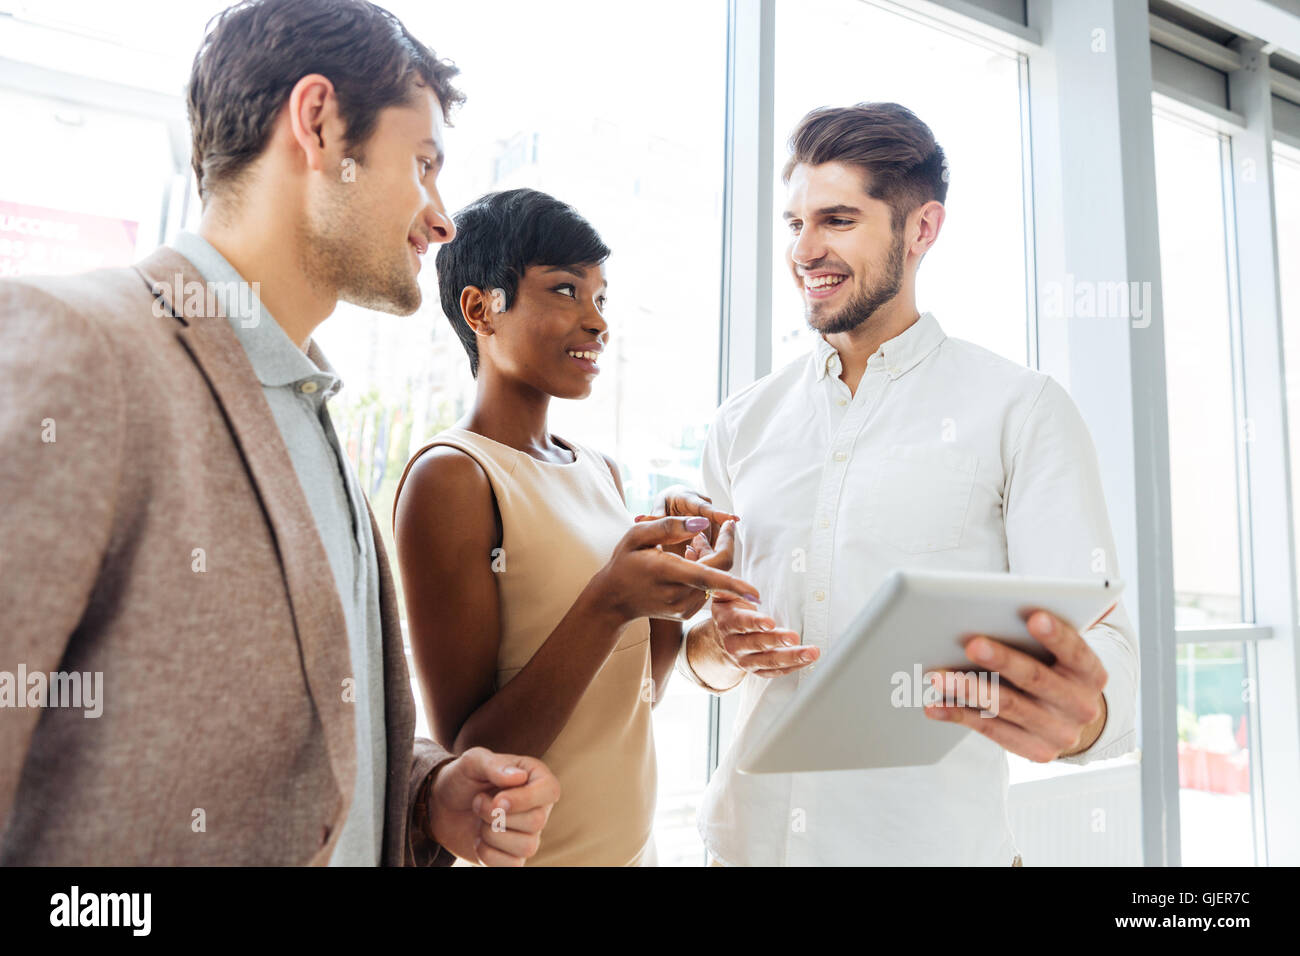 Cheerful young business people talking and using tablet together in office Stock Photo